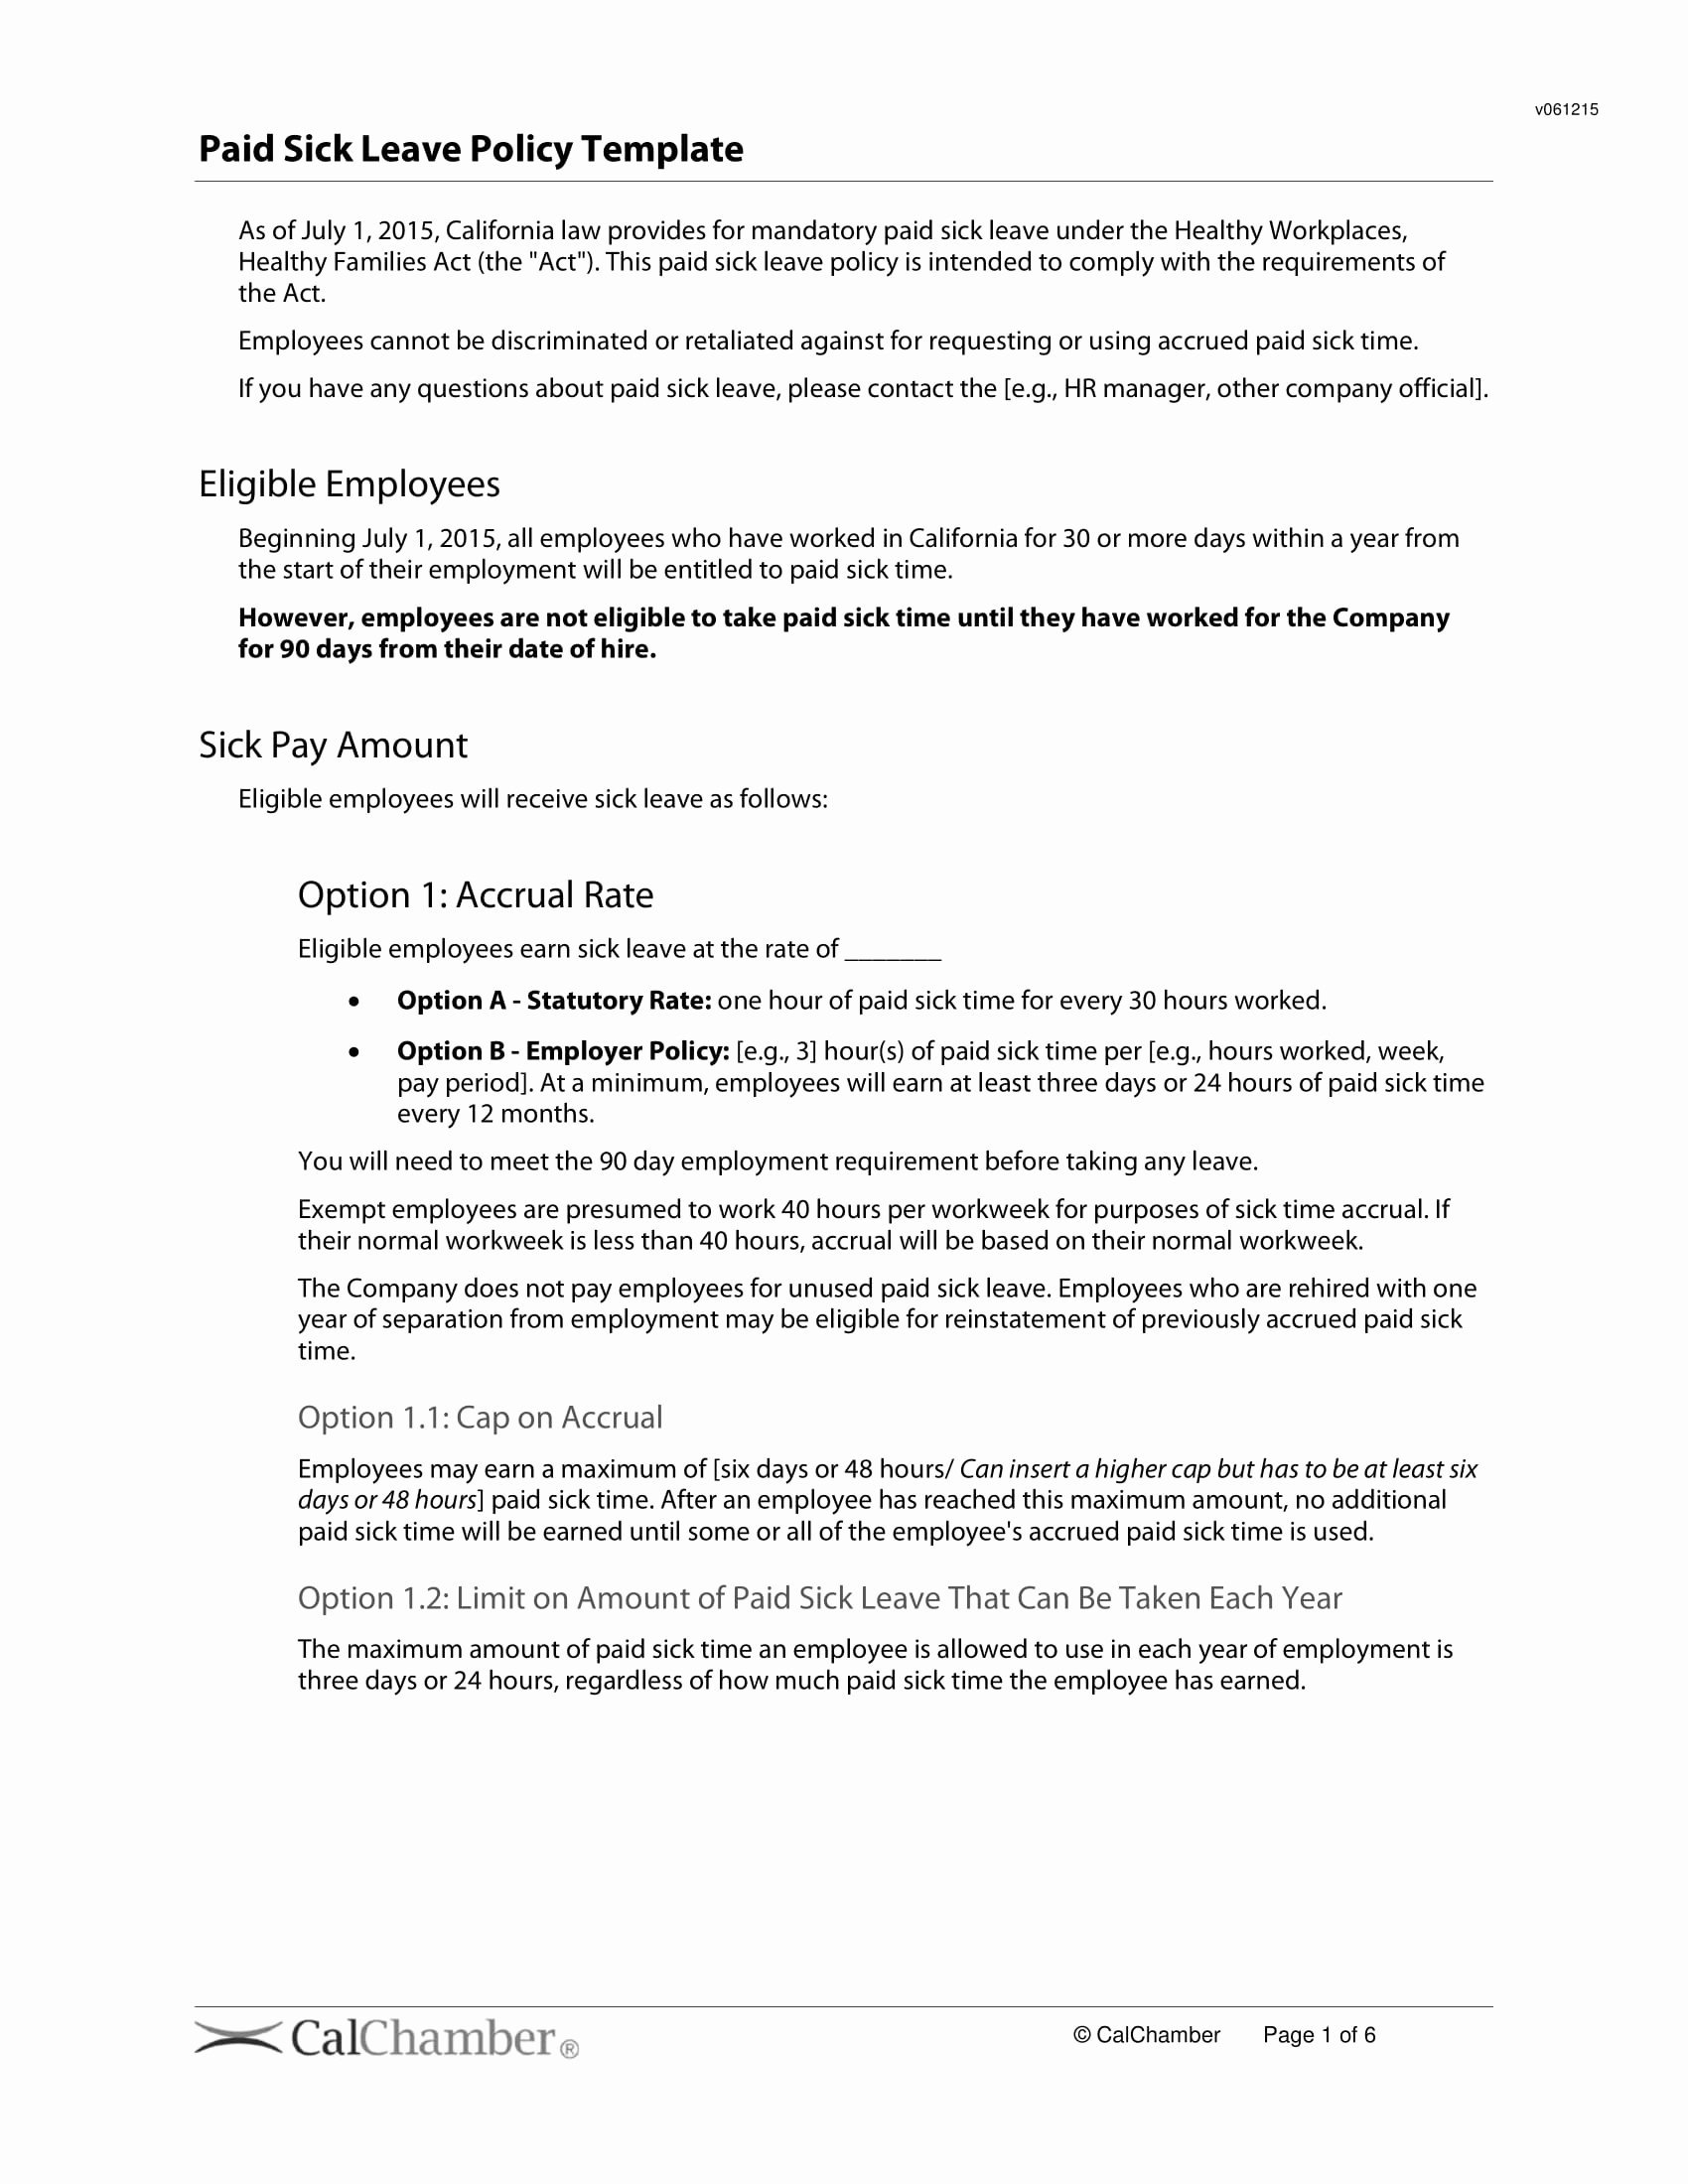 Sick Leave form Template Awesome 15 Leave Policy Examples Pdf Word